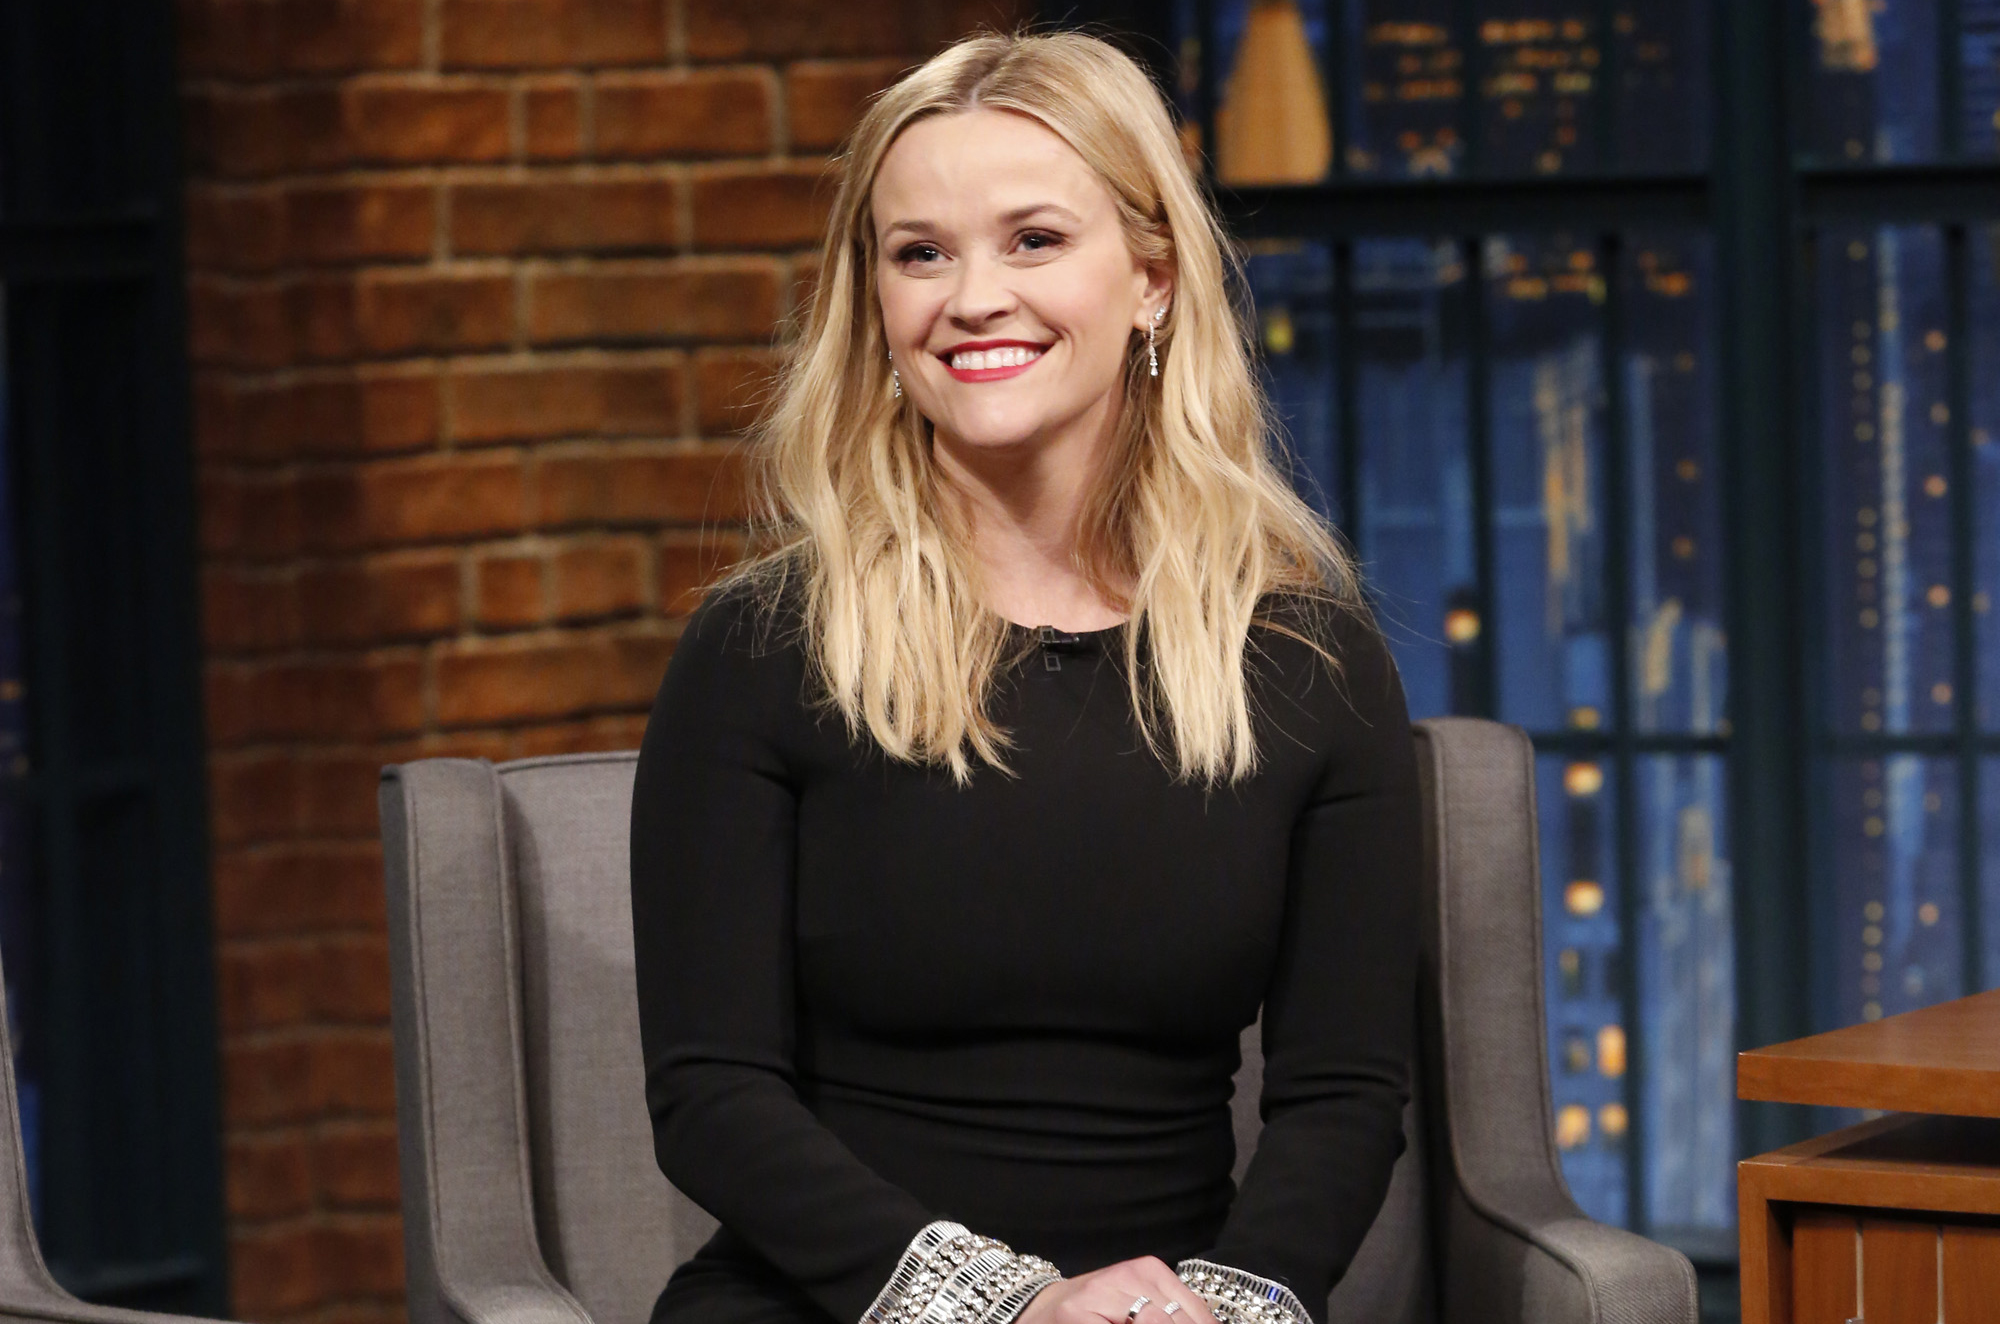 Reese Witherspoon's Pinstripe Pants Are a Work Wardrobe Must-Have